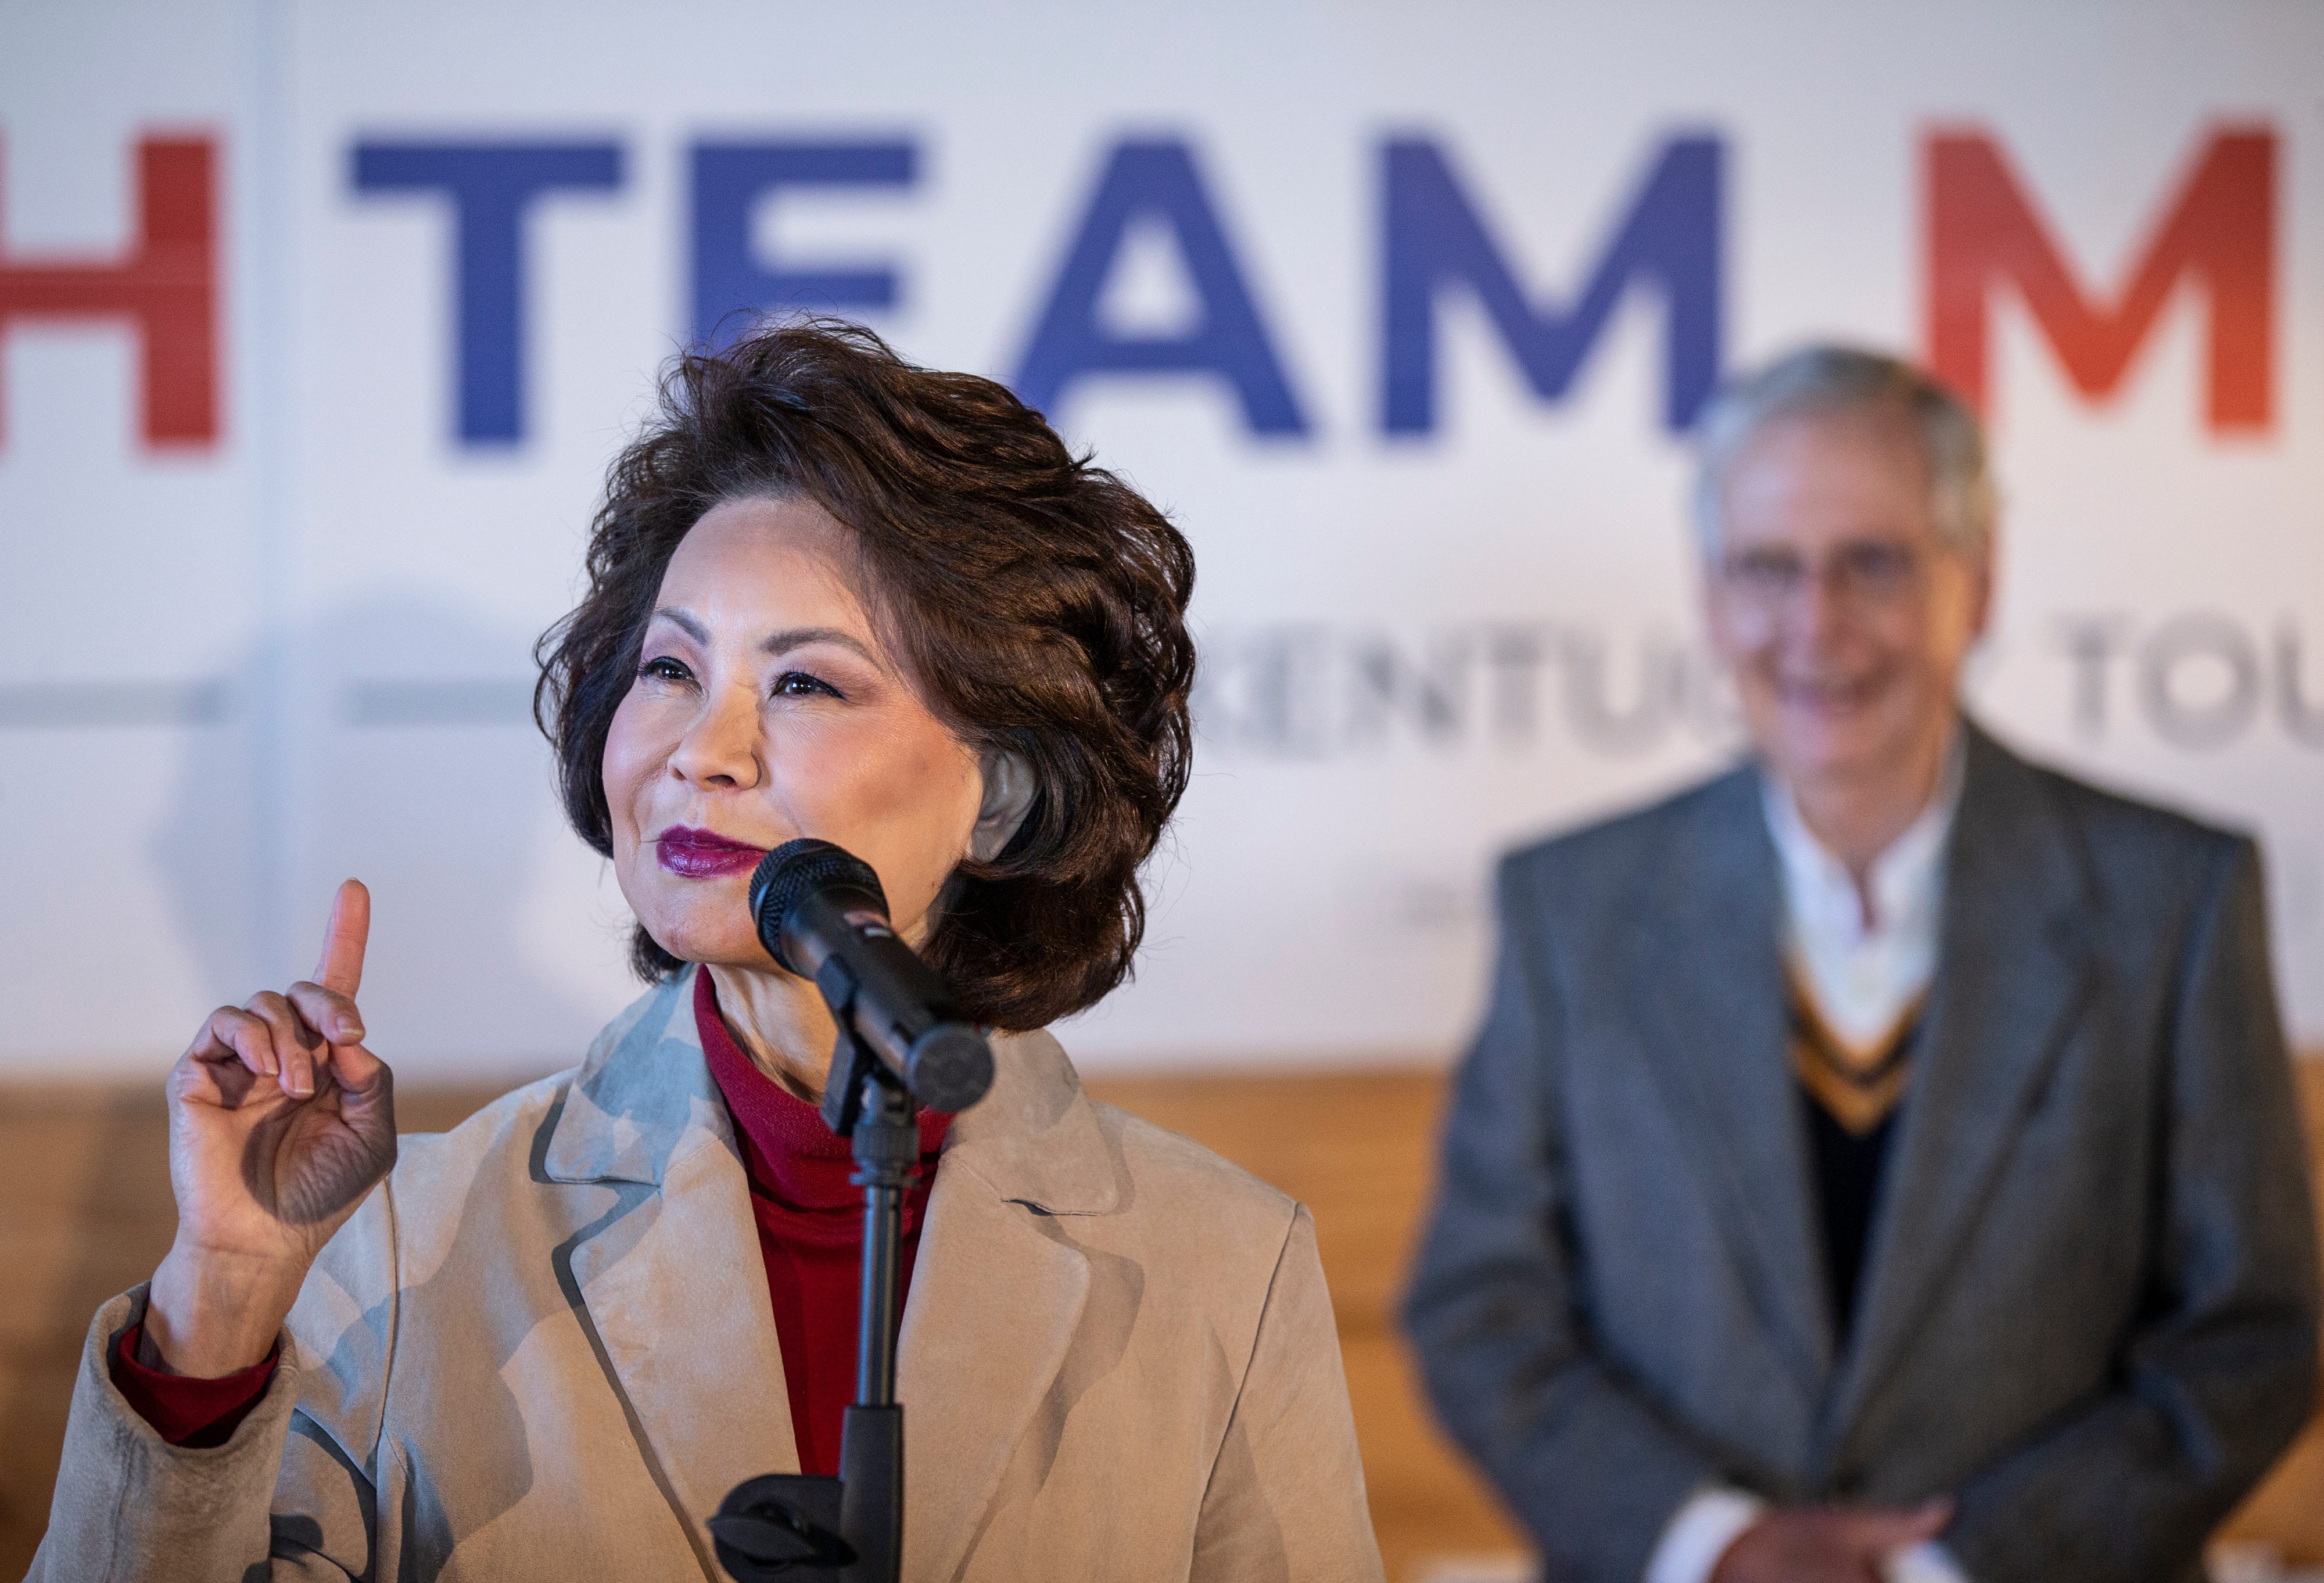 Elaine Chao misused position, Inspector